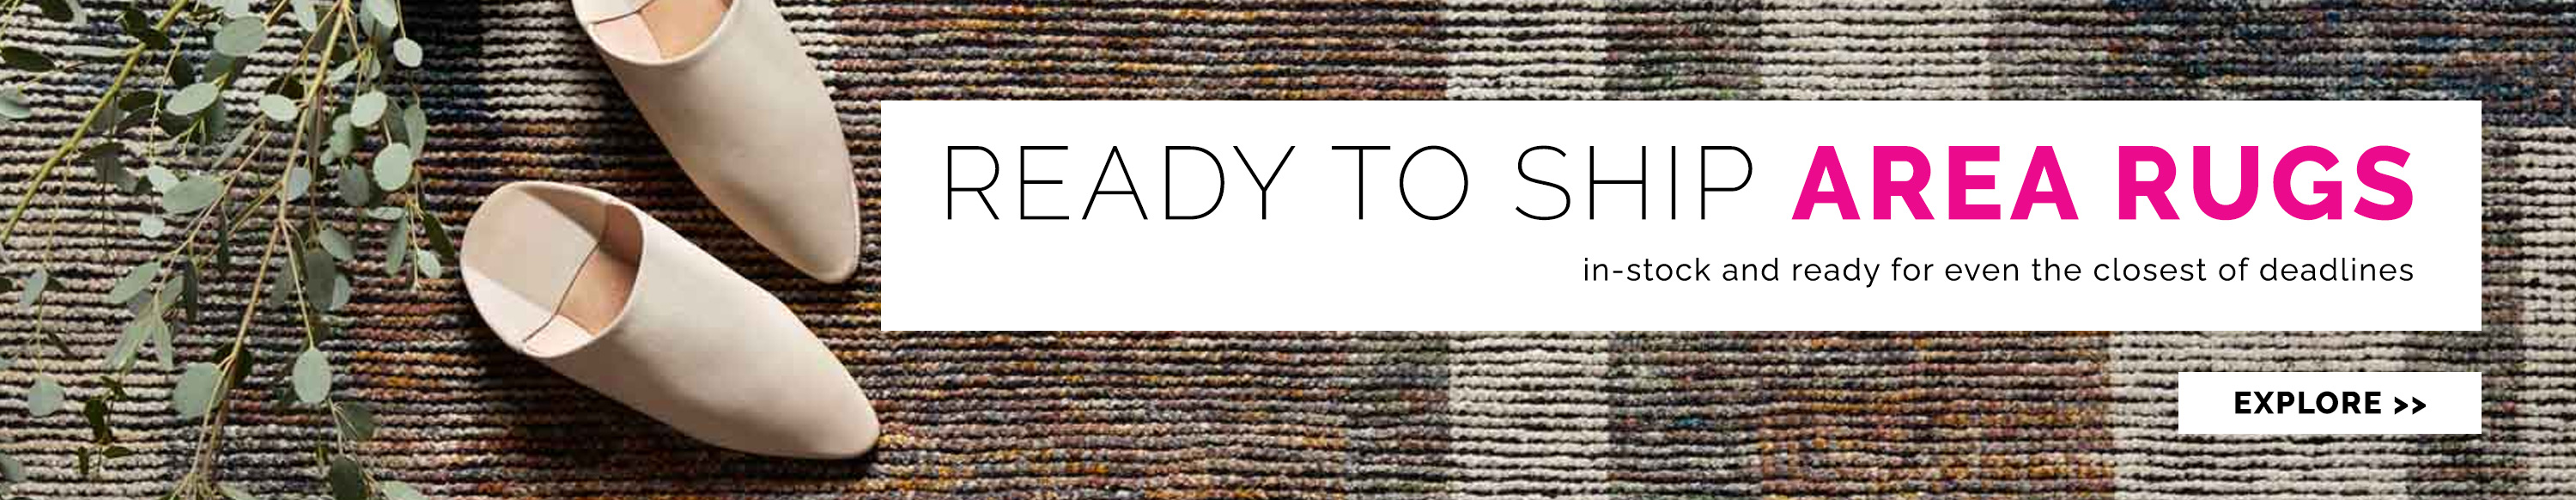 Explore our ready to ship area rugs. We have a variety of rugs in-stock for even the closest of deadlines. Explore the rug collection now.